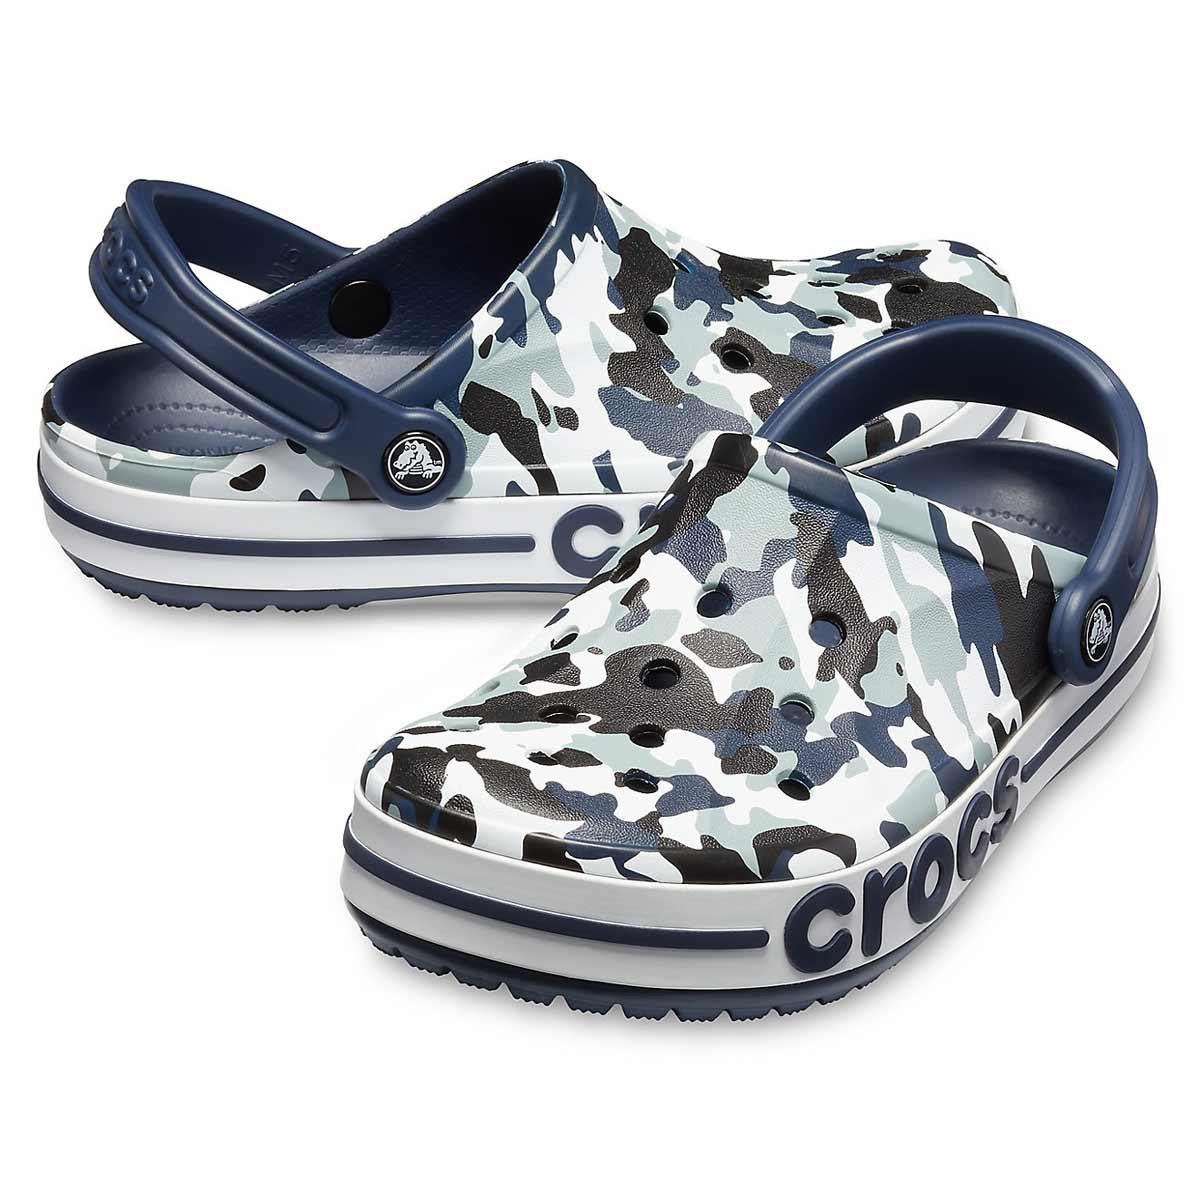 Crocs Baya Graphic K Kids Clog (Camo) Online at Lowest Price in India